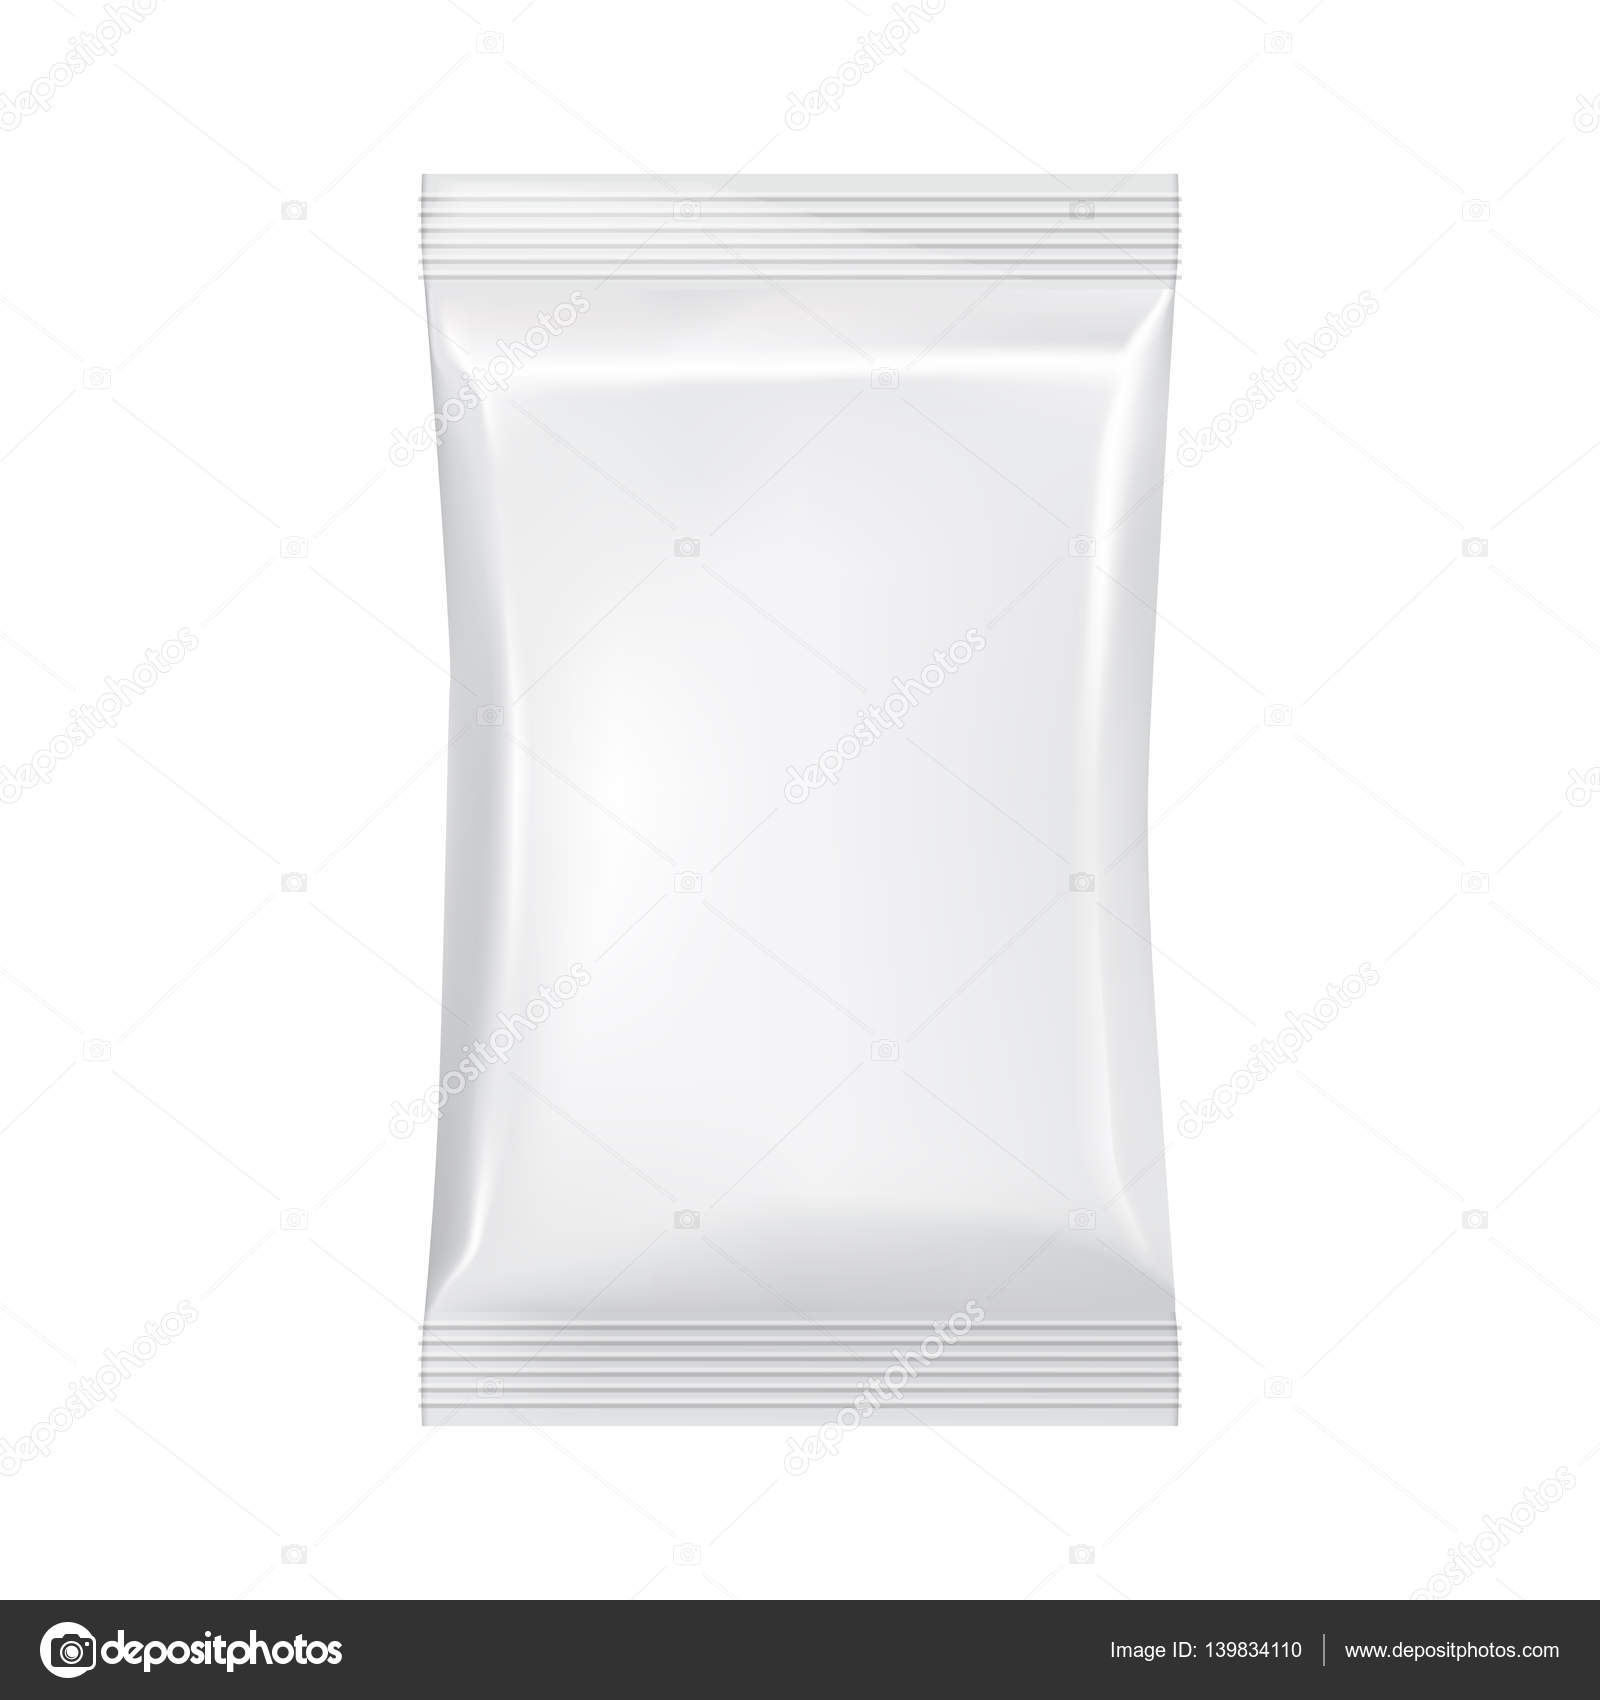 Blank Packaging Template Mockup Isolated On White. — Stock Throughout Blank Packaging Templates